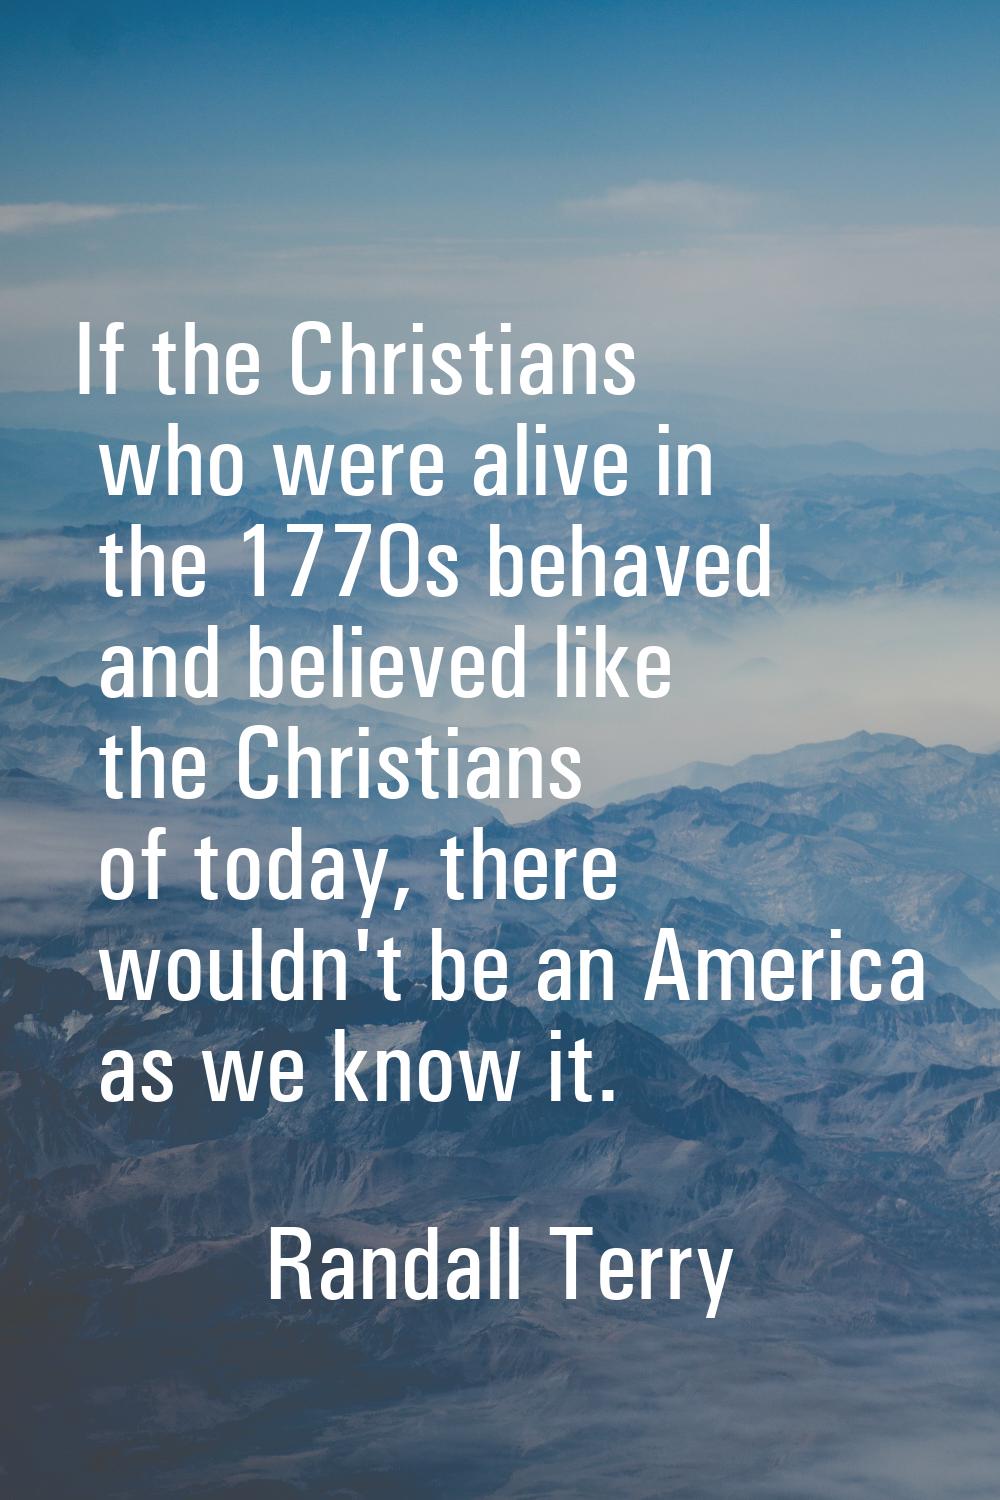 If the Christians who were alive in the 1770s behaved and believed like the Christians of today, th